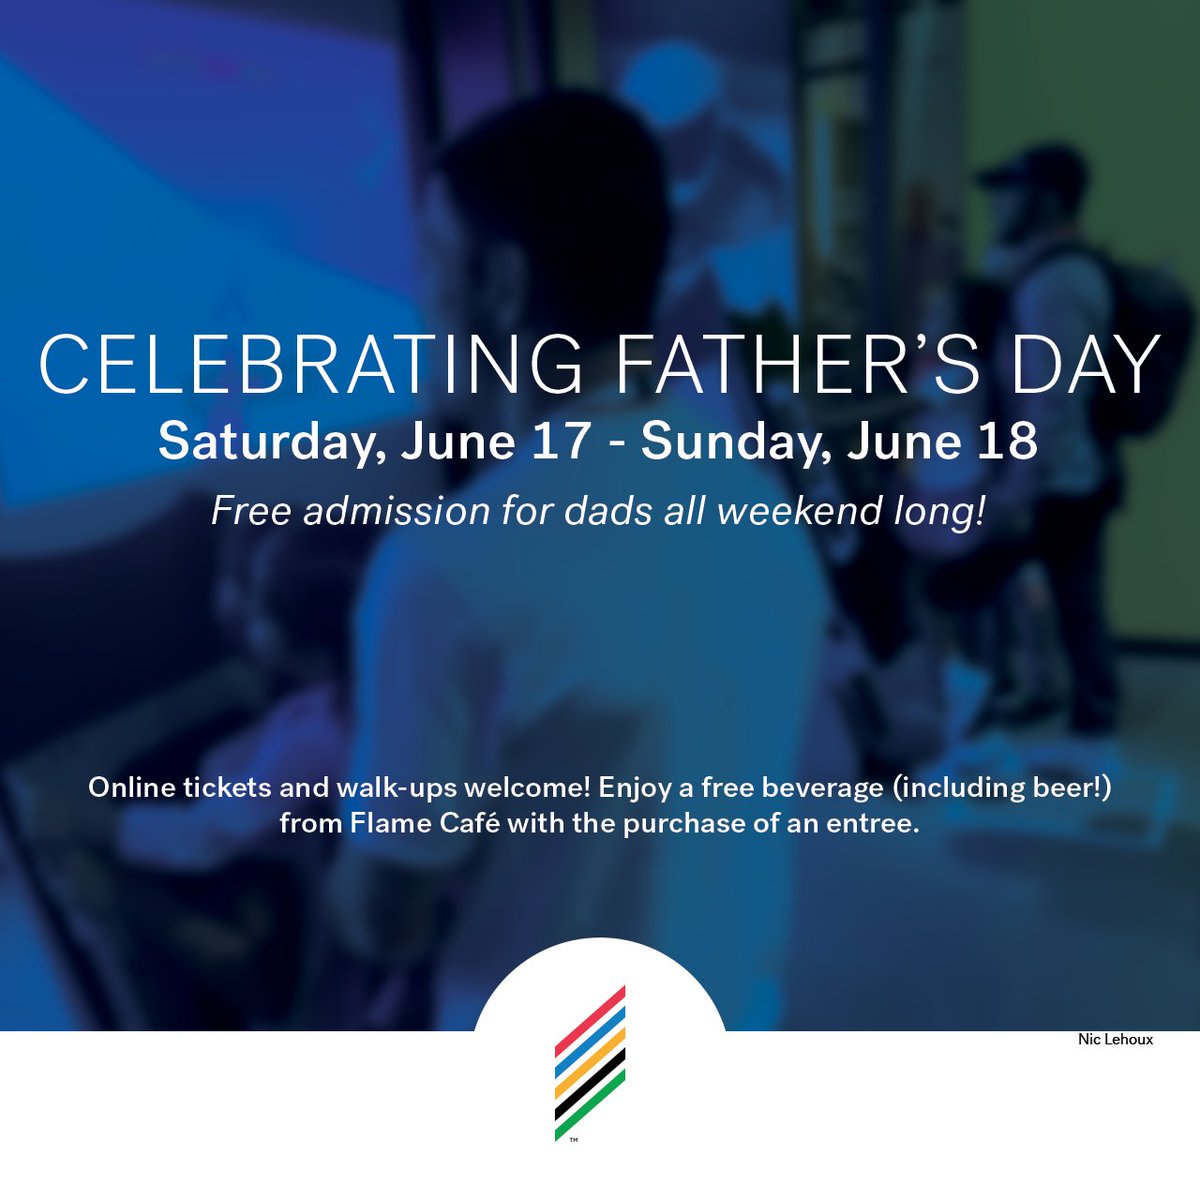 We're celebrating dads all weekend long! 👔 Enjoy complimentary admission and spend Father's Day with the stories of Team USA's greatest athletes. 🇺🇸

#TakePart: usopm.org/plan-your-visit

@VisitCOS @DowntownCS @OlympicCityUSA